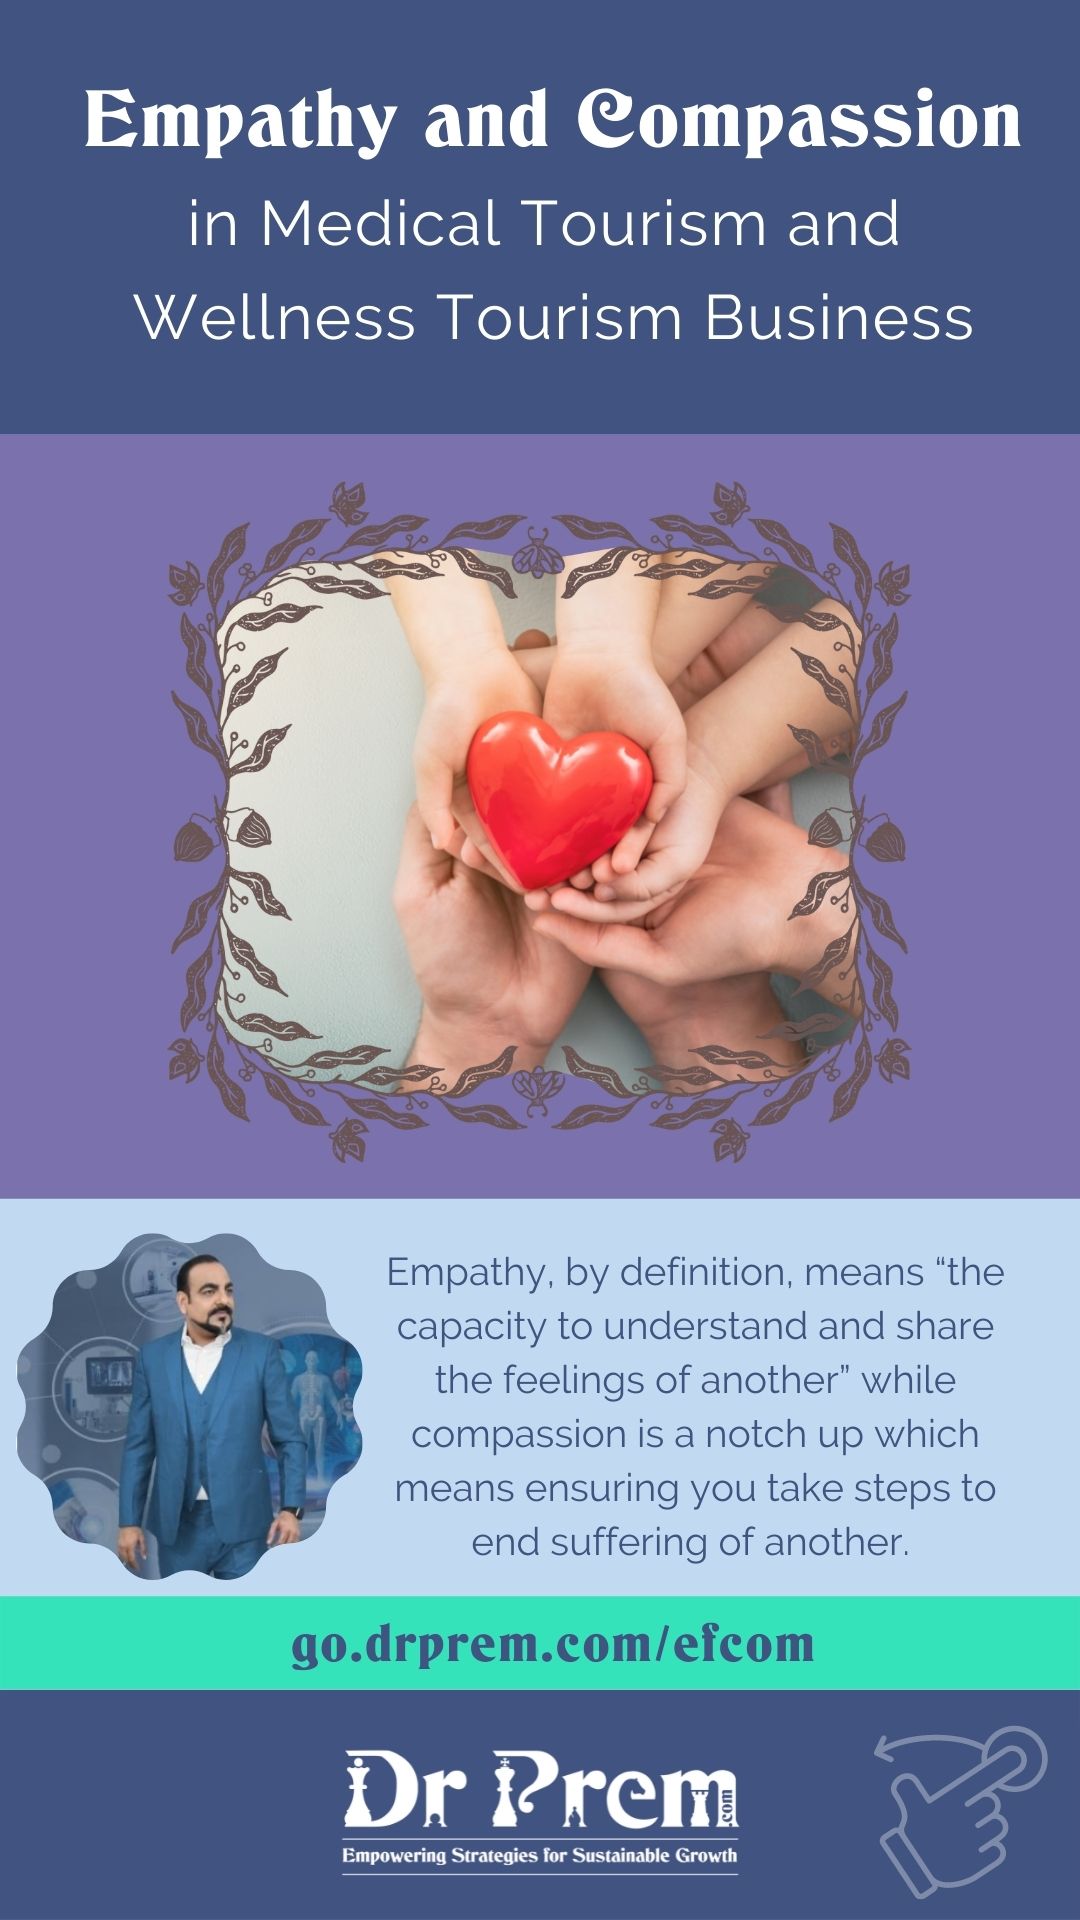 GuideSlide Empathy and Compassion